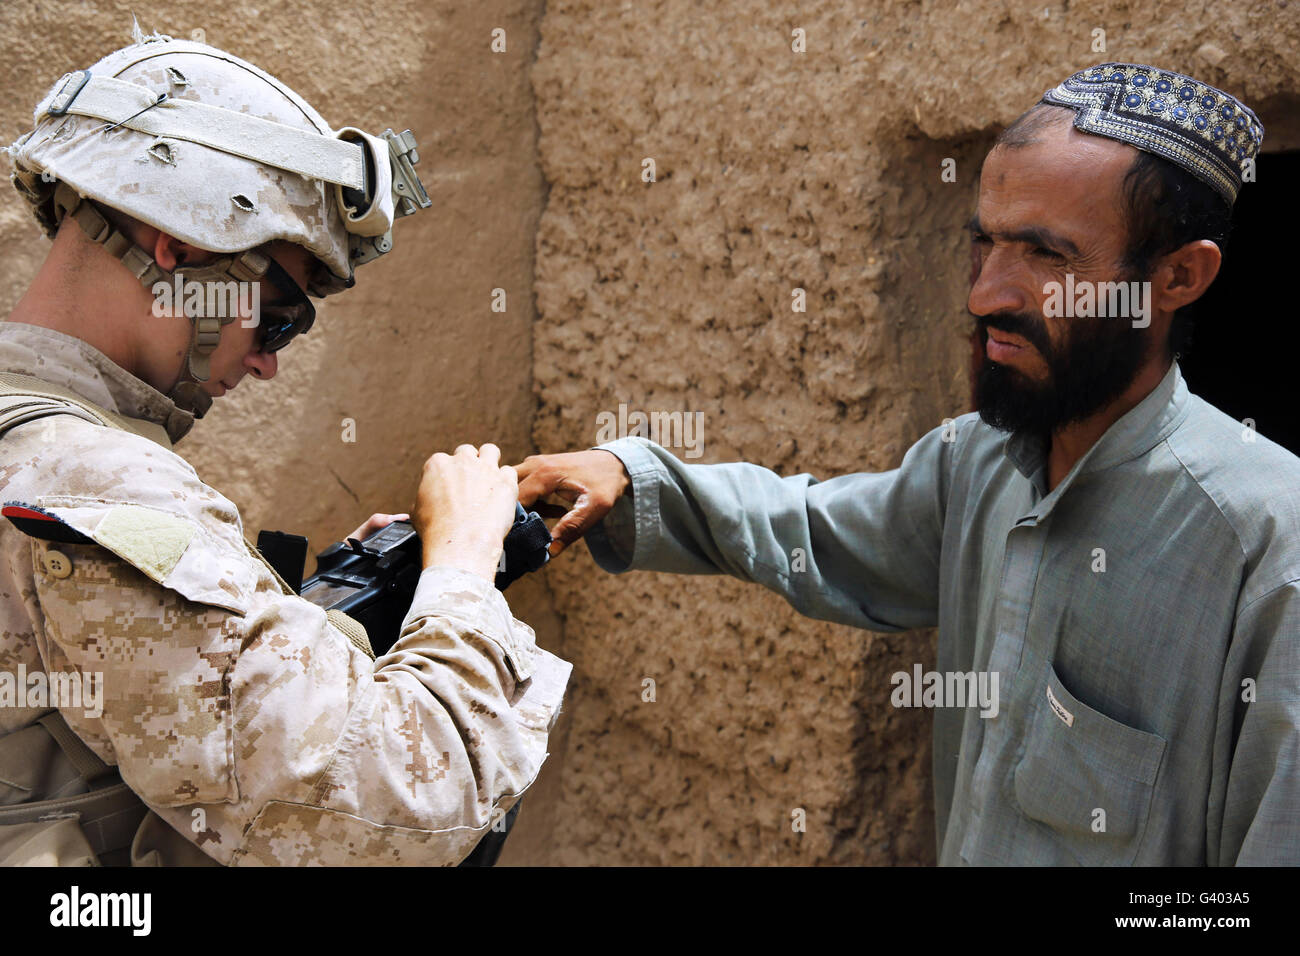 U.S. Marine enrolls an Afghan into the Secure Electronic Enrollment Kit. Stock Photo